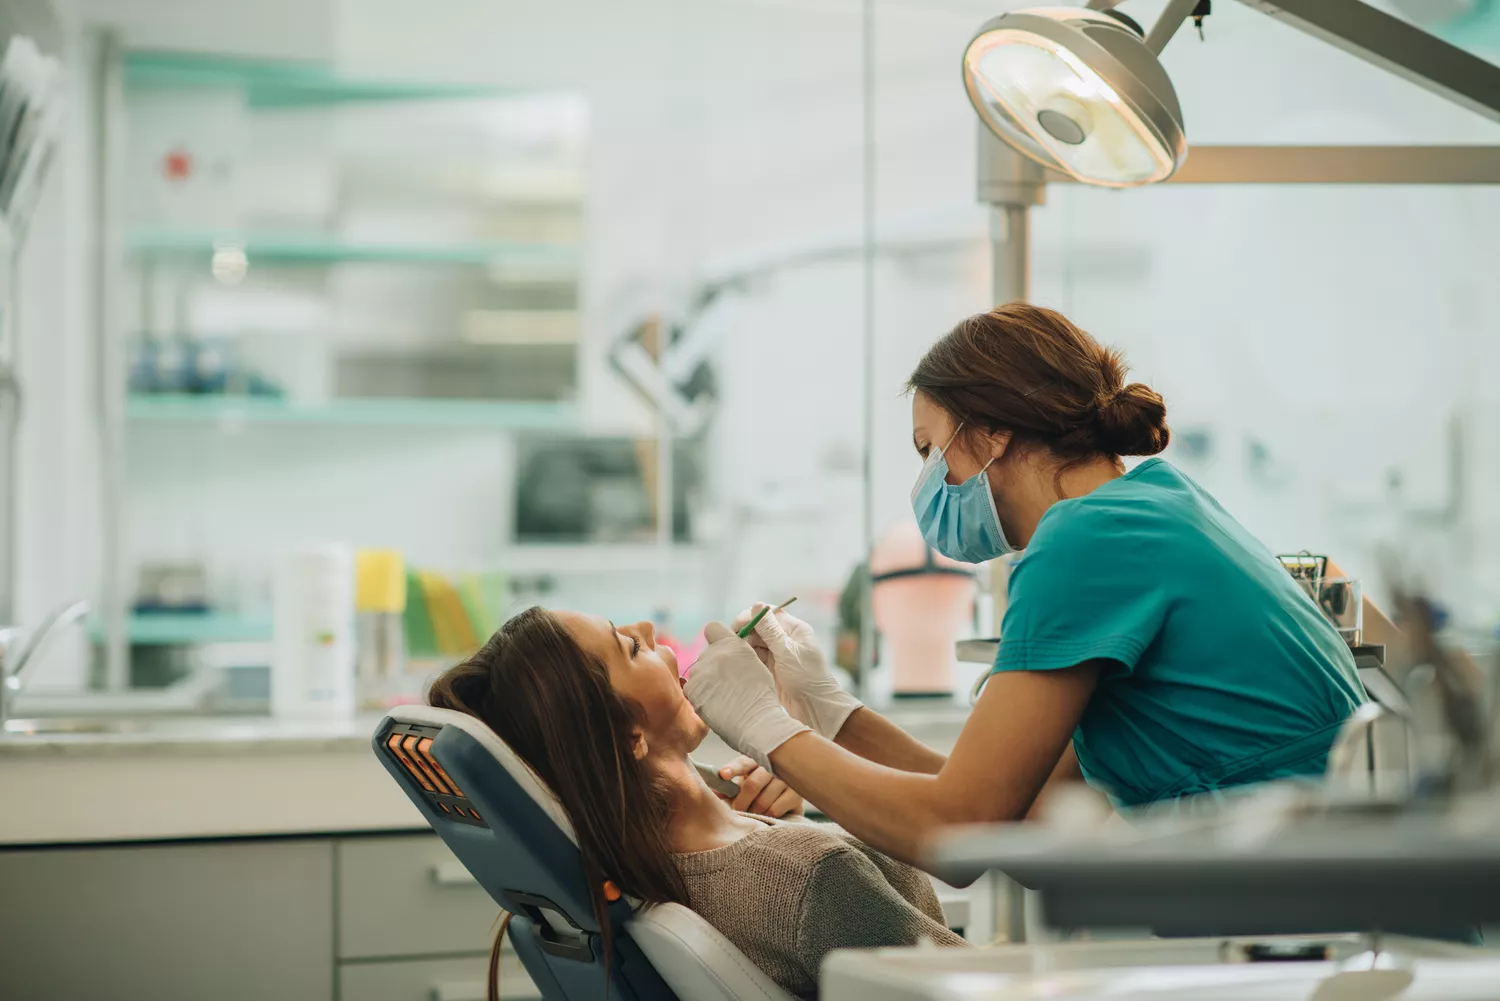 Regular Dental Visits Linked to Increased Survival Rate for Head, Neck Cancer Patients